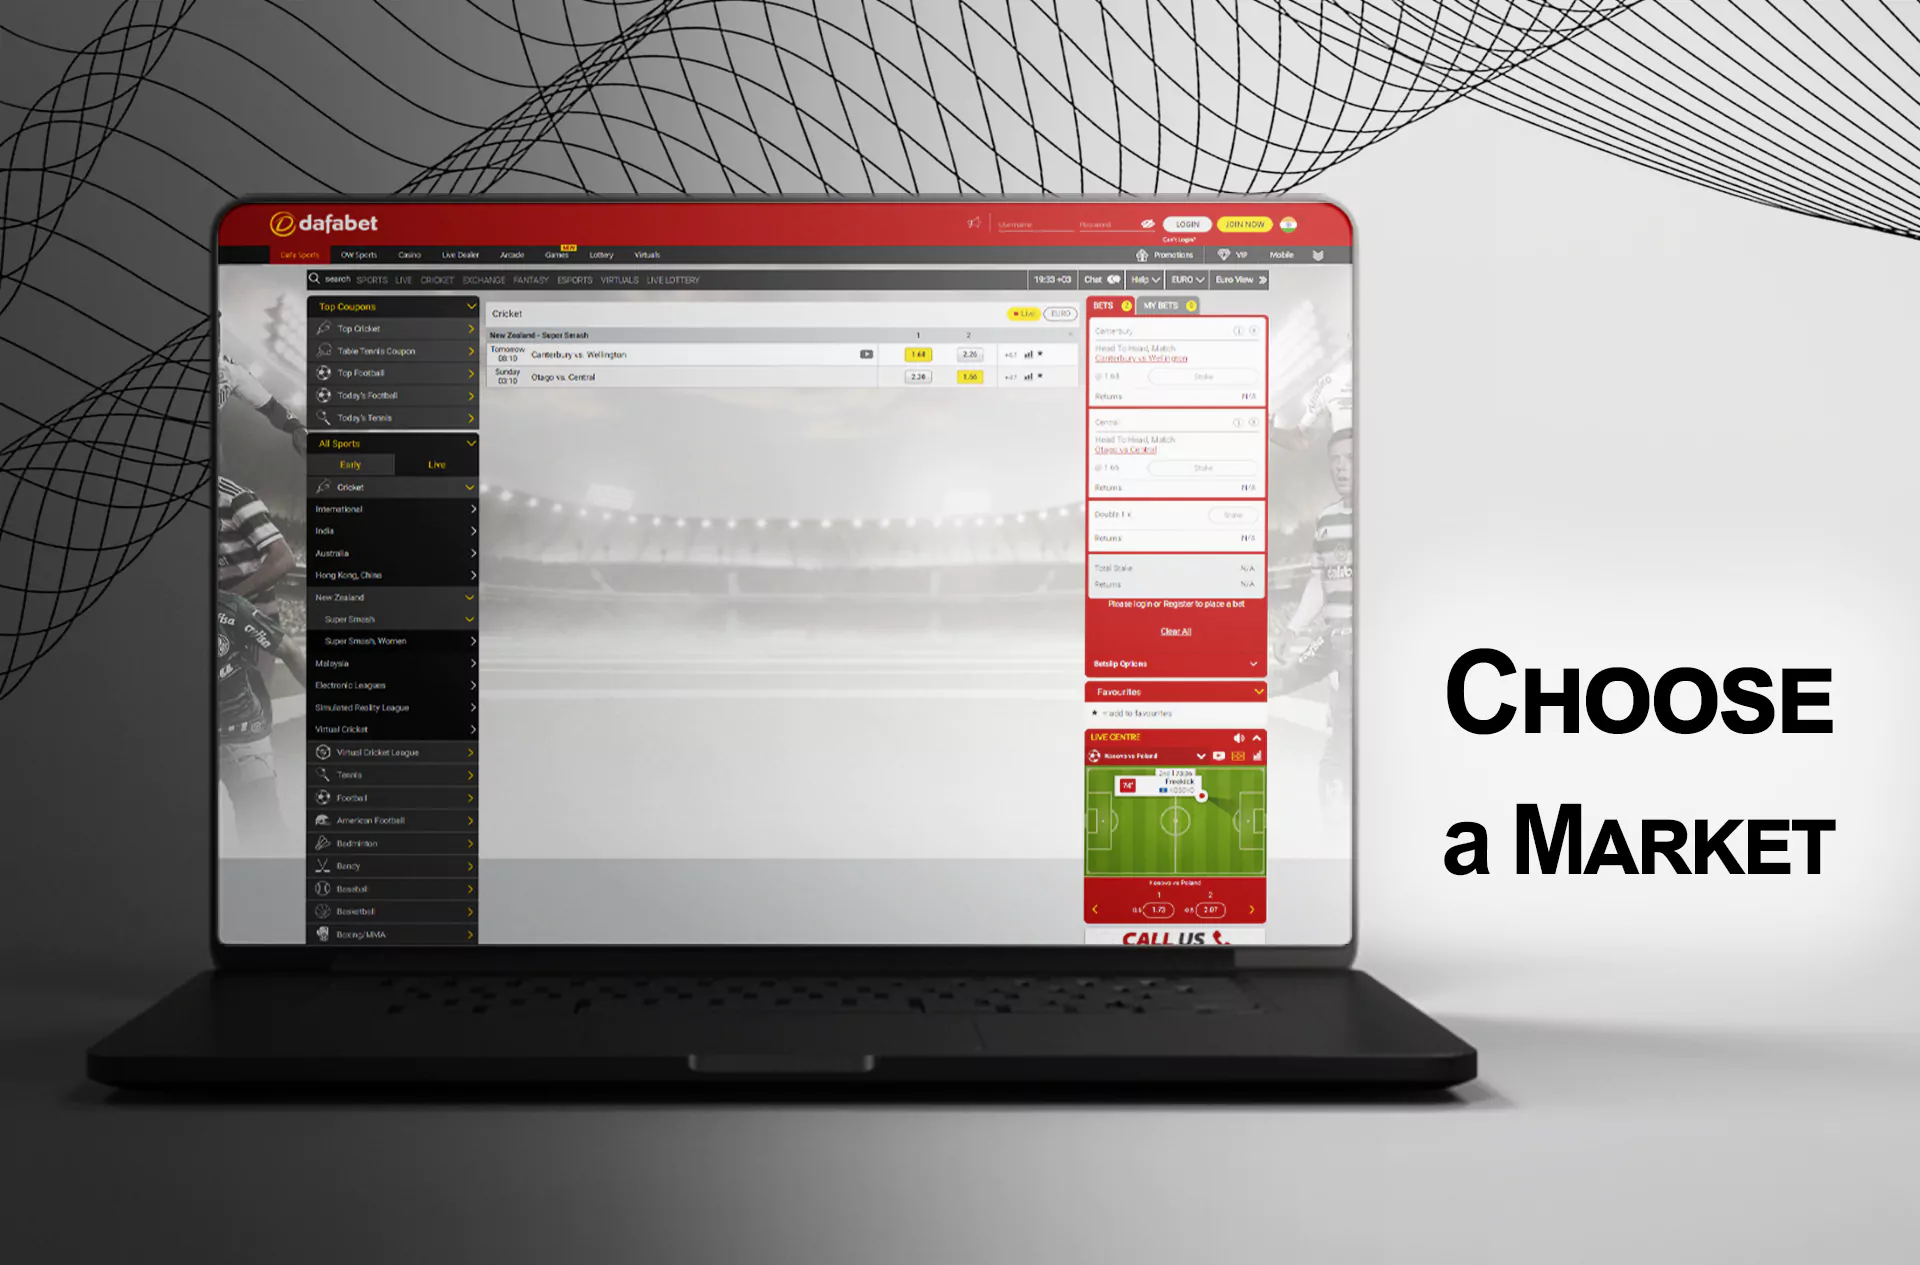 Analyze a match, choose a market, and select a winner according to your prediction.